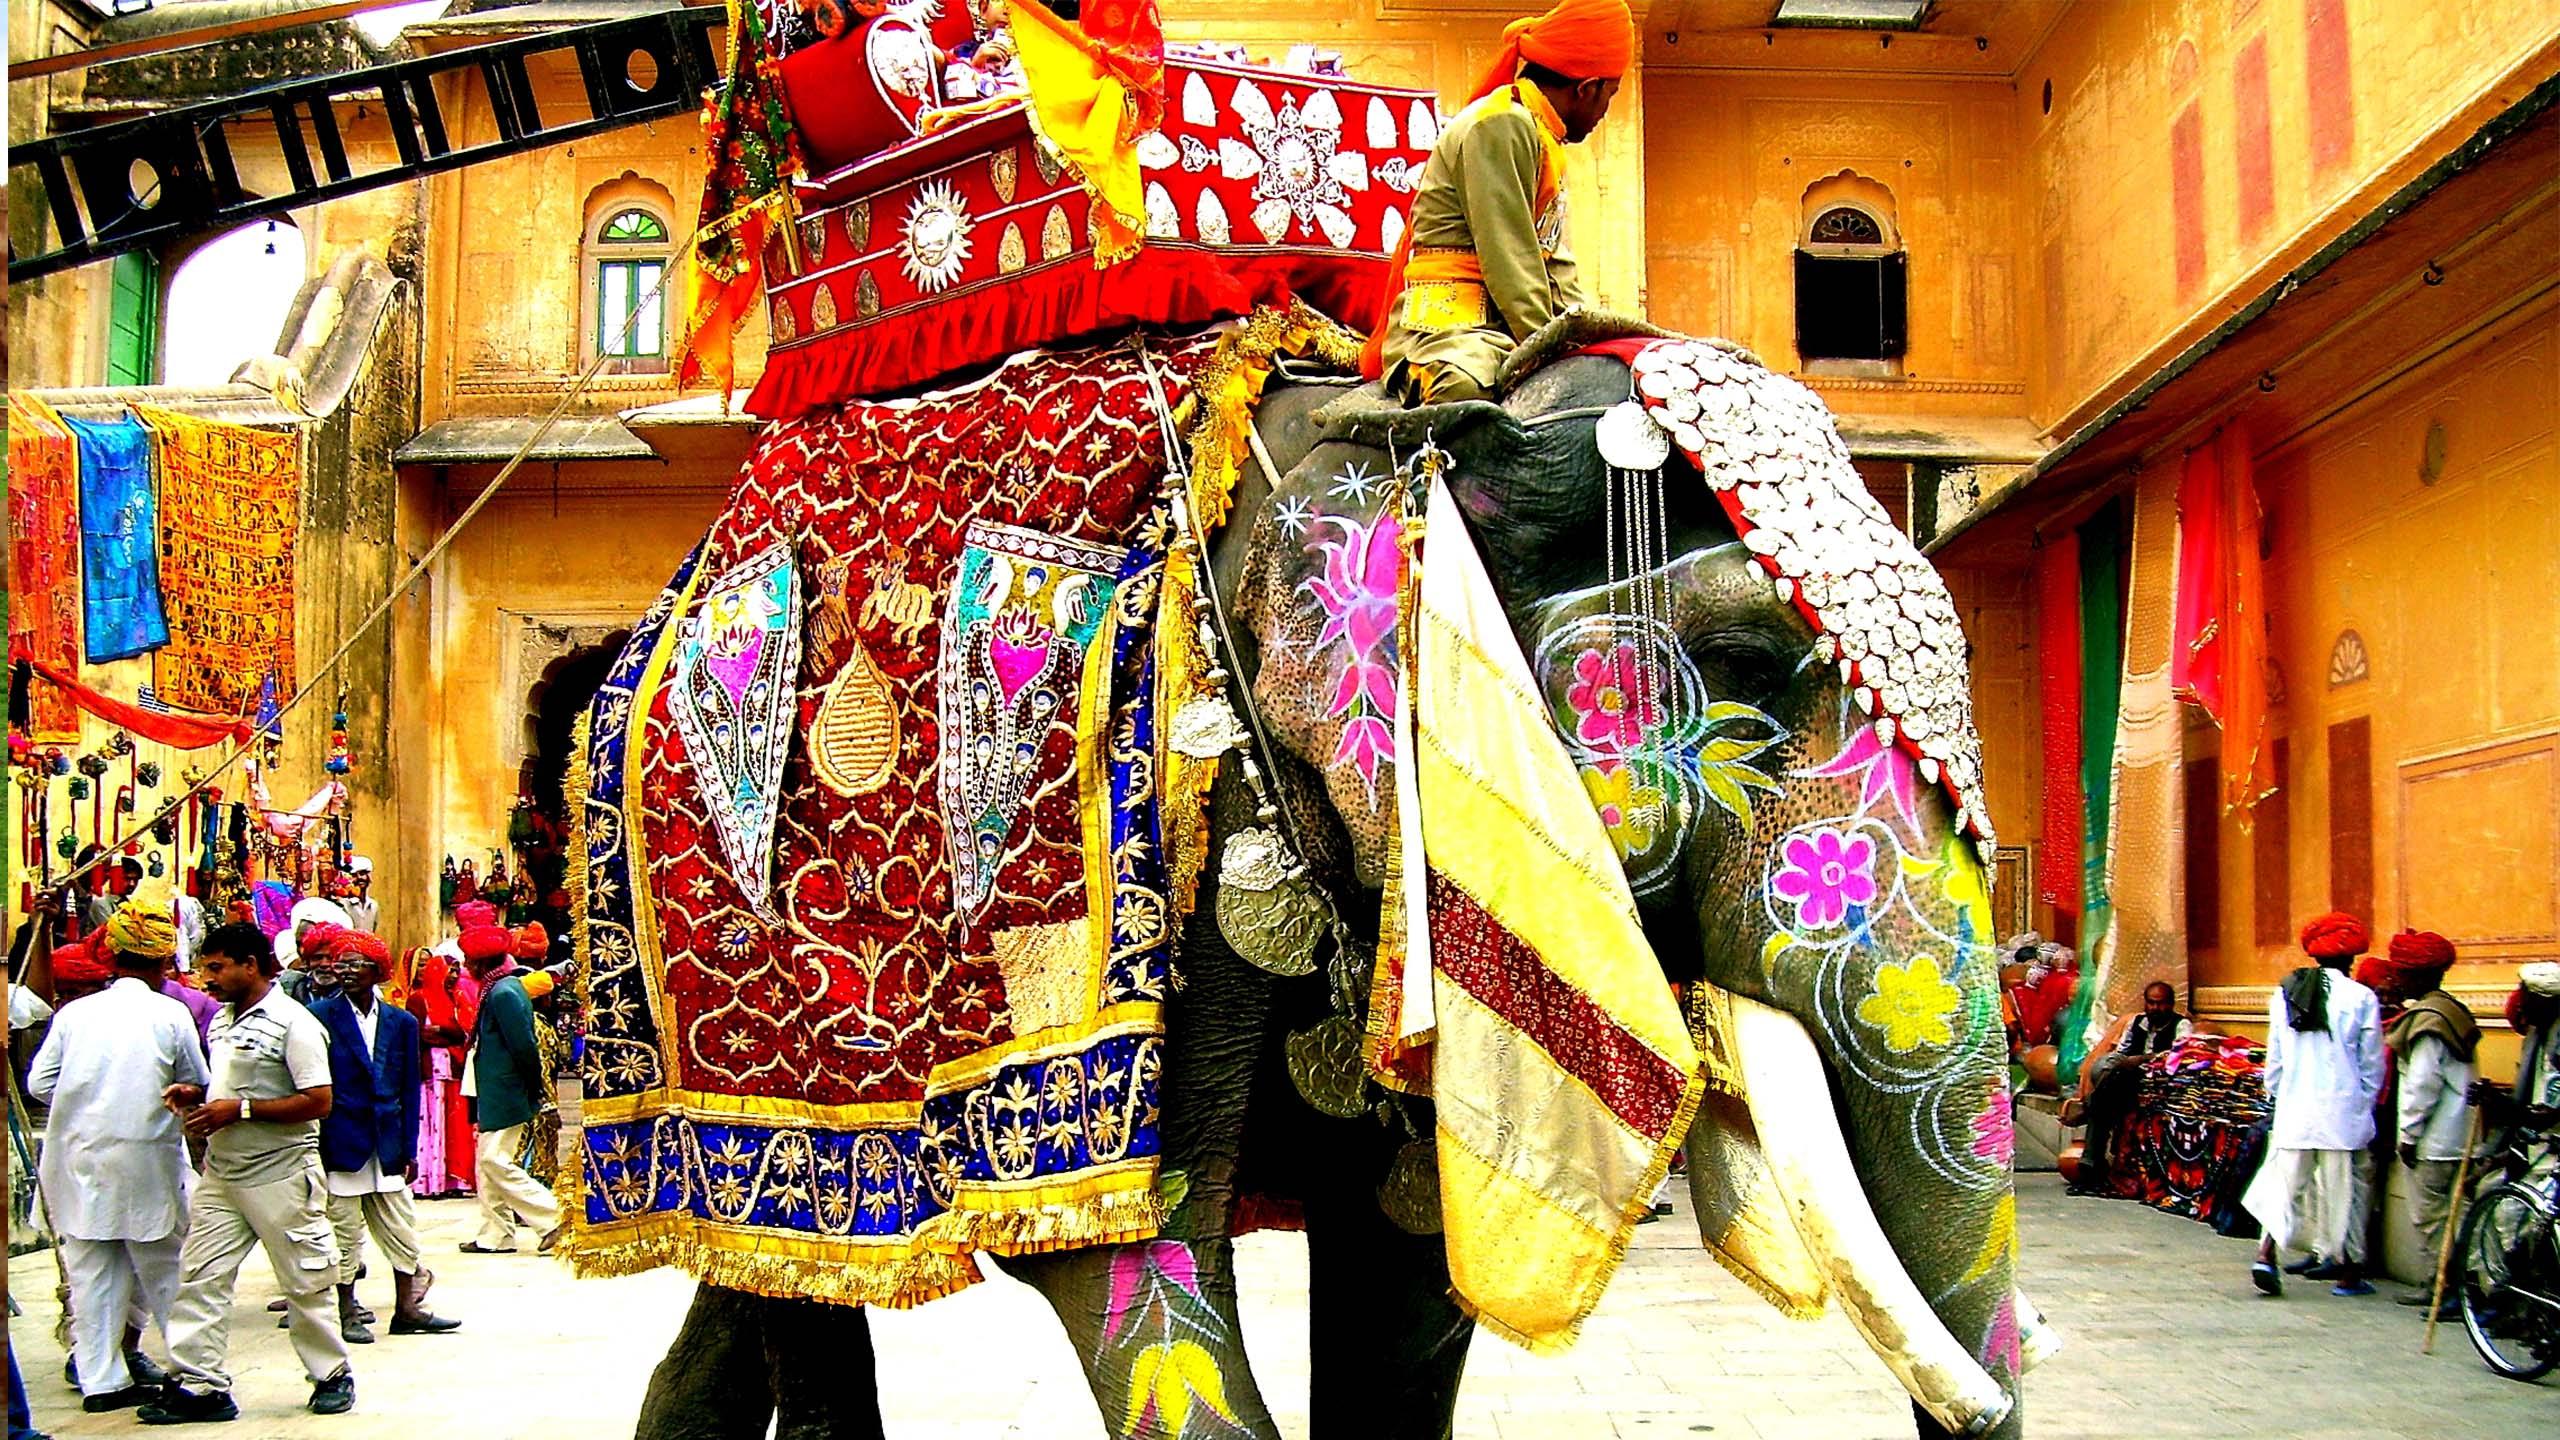 Rajasthani Culture Wallpaper Hd - Indian Elephant Dressed Up , HD Wallpaper & Backgrounds